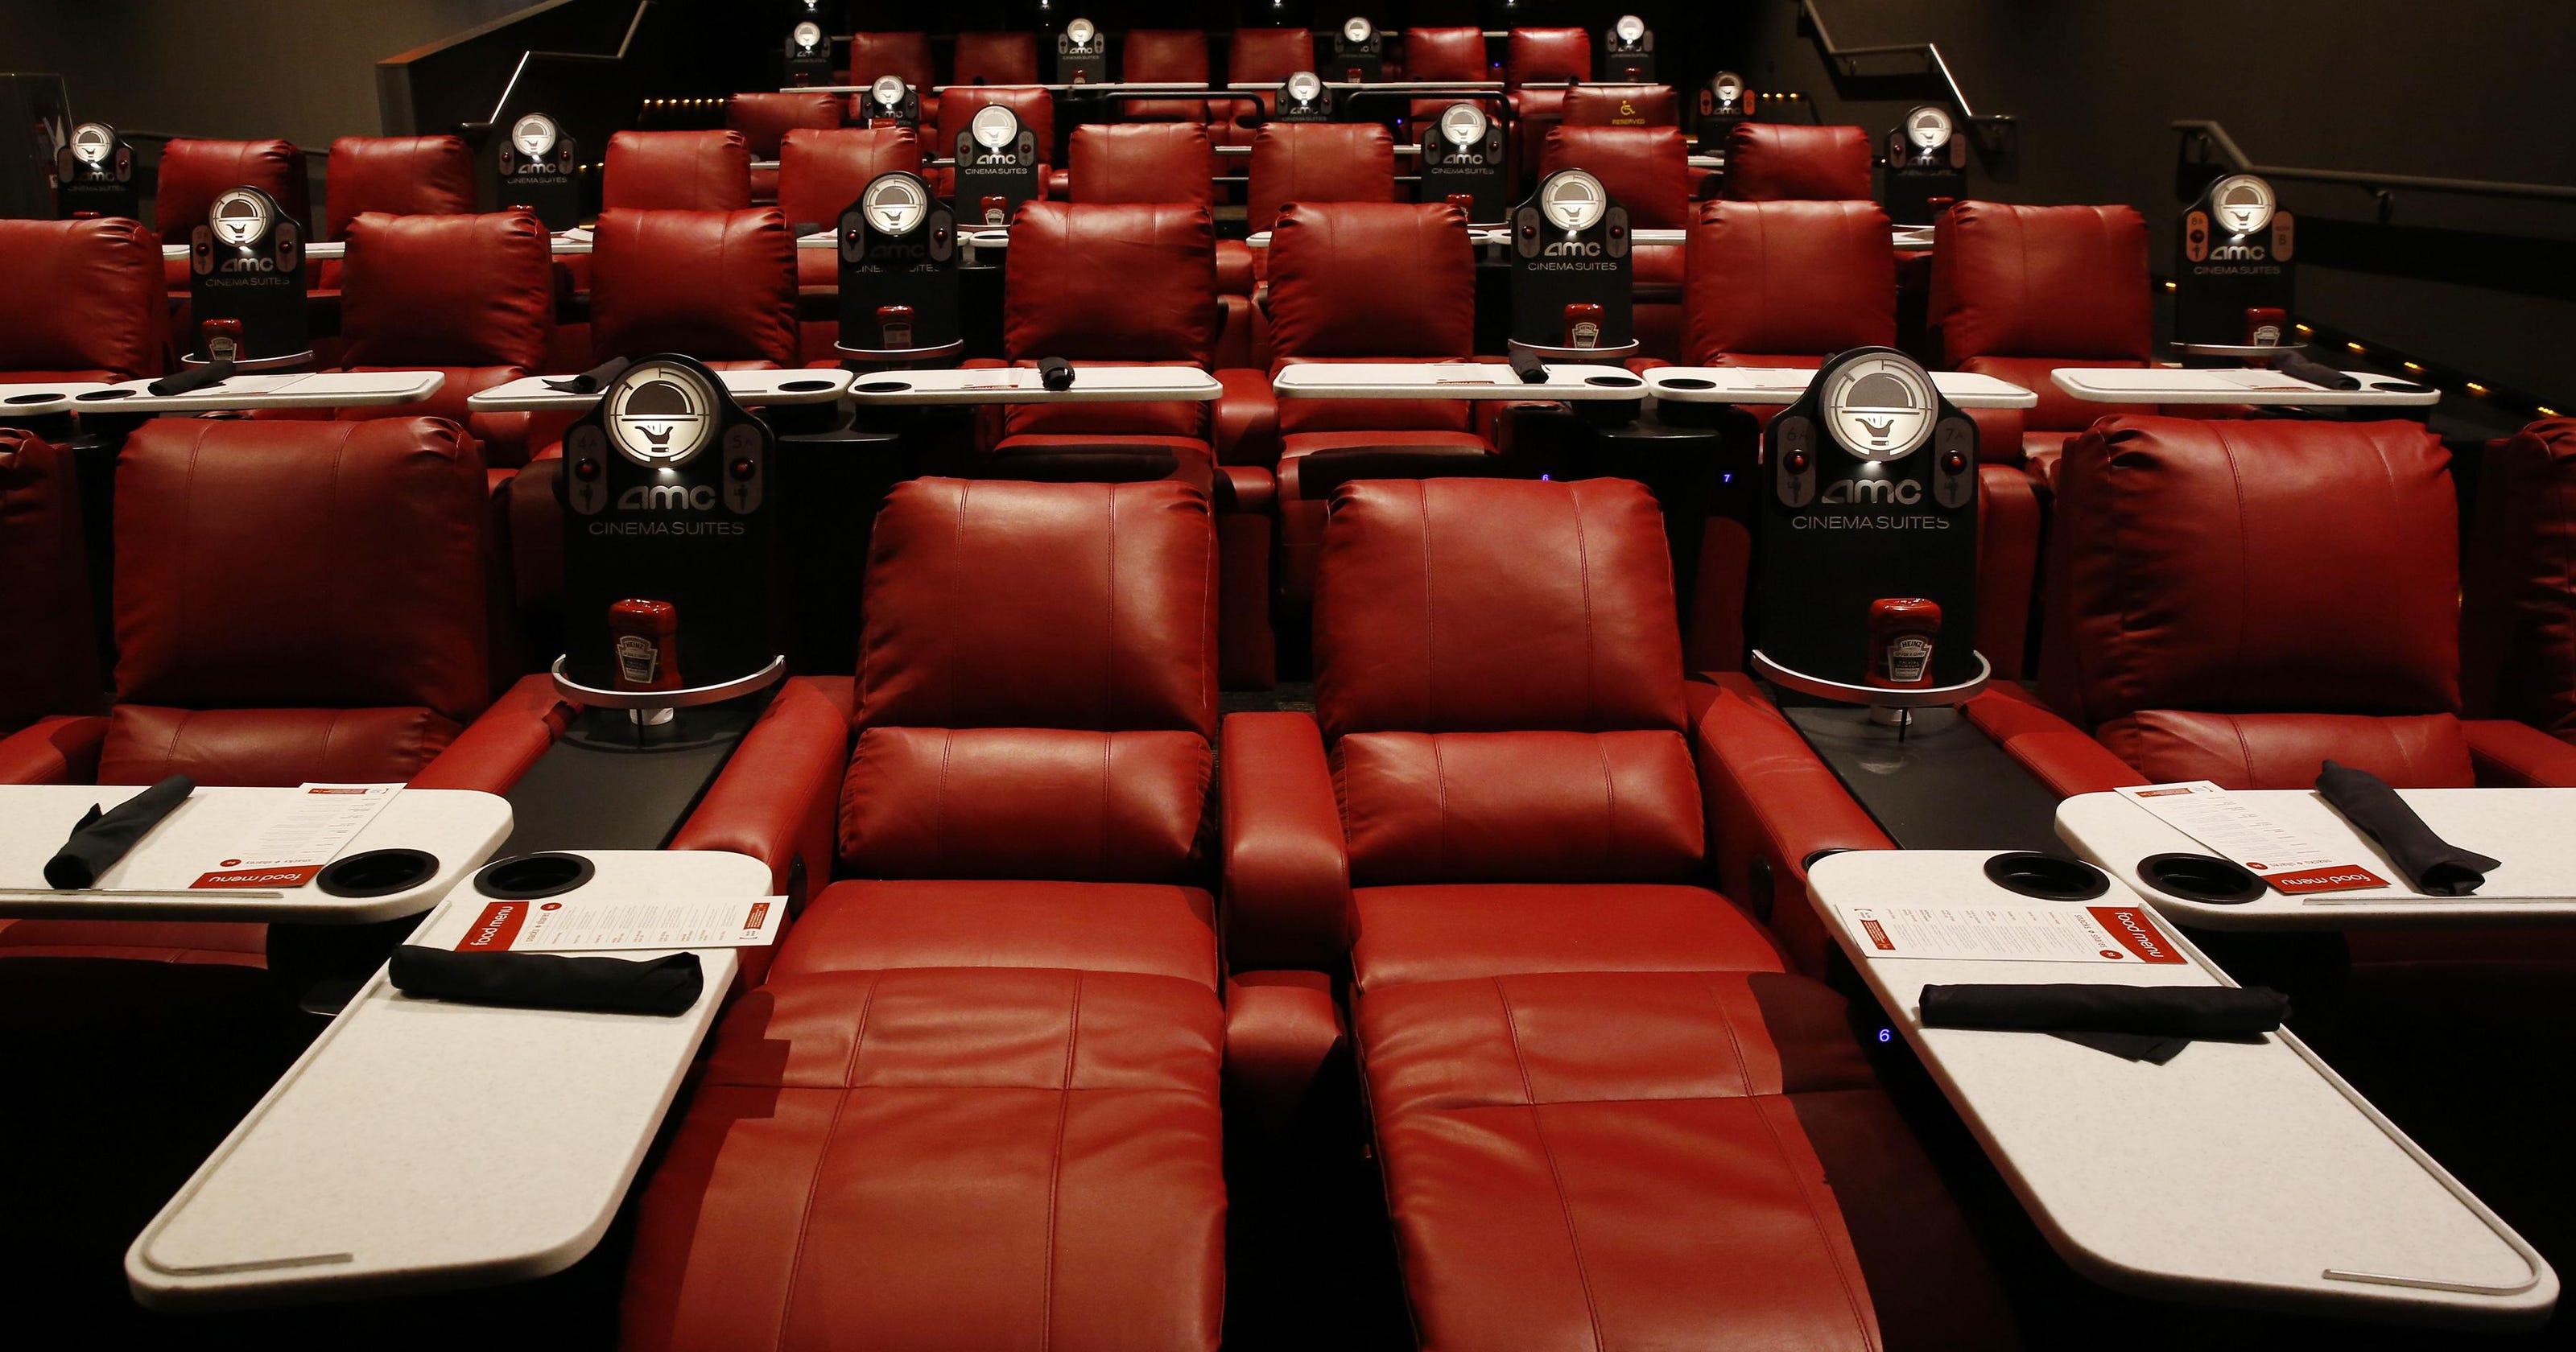 Movie theaters push fancy foods to attract patrons